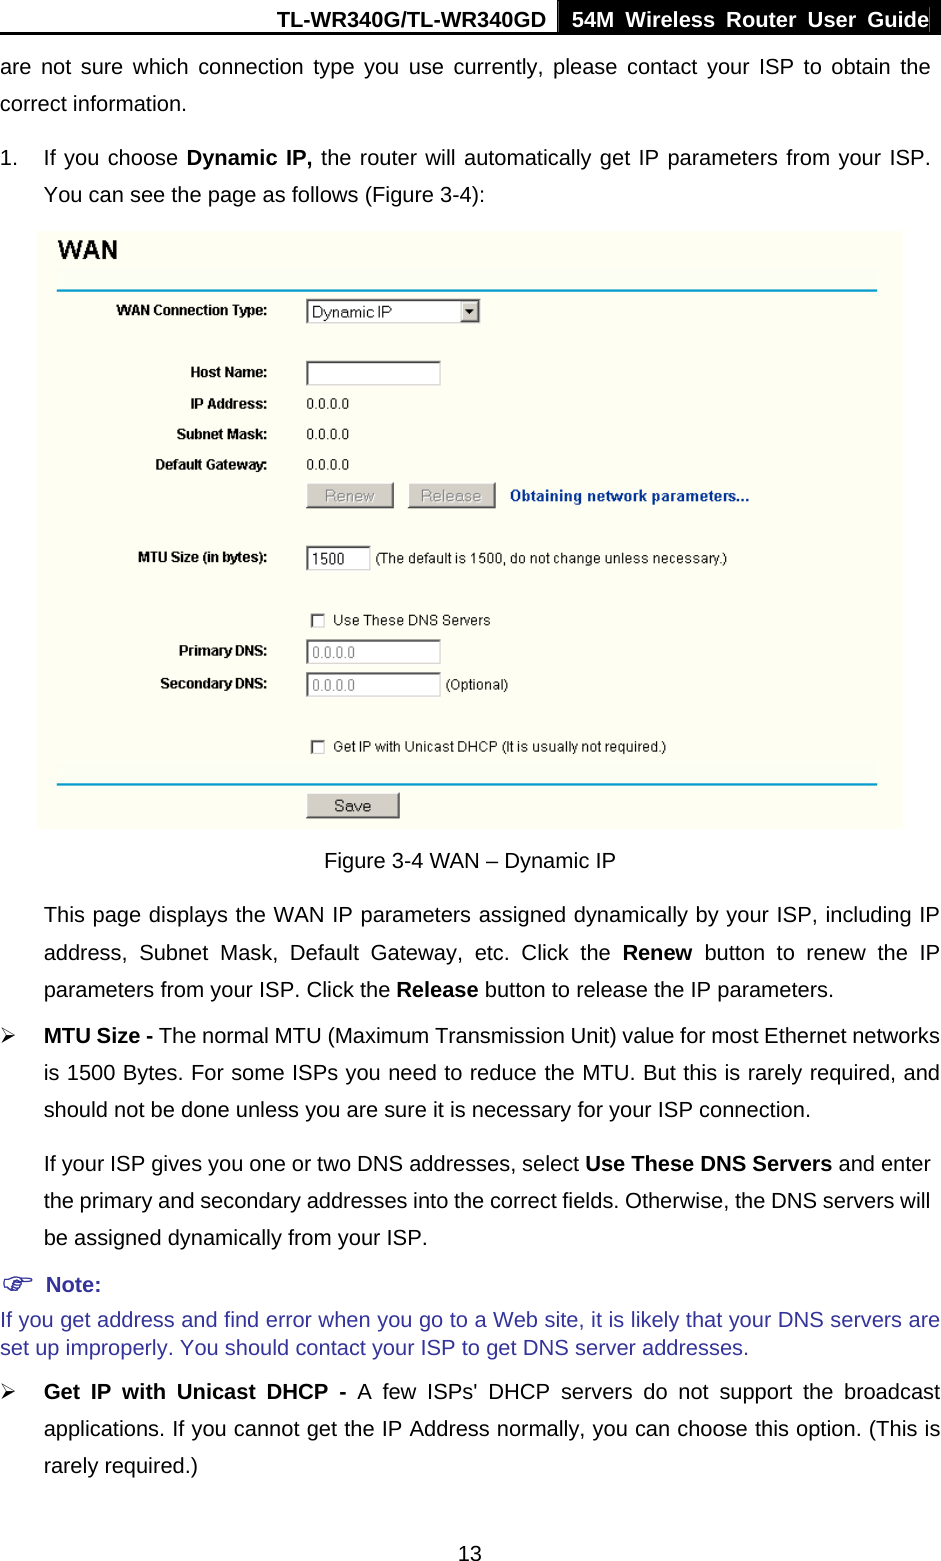 TL-WR340G/TL-WR340GD 54M Wireless Router User Guide  13are not sure which connection type you use currently, please contact your ISP to obtain the correct information. 1.  If you choose Dynamic IP, the router will automatically get IP parameters from your ISP. You can see the page as follows (Figure 3-4):  Figure 3-4 WAN – Dynamic IP This page displays the WAN IP parameters assigned dynamically by your ISP, including IP address, Subnet Mask, Default Gateway, etc. Click the Renew button to renew the IP parameters from your ISP. Click the Release button to release the IP parameters. ¾ MTU Size - The normal MTU (Maximum Transmission Unit) value for most Ethernet networks is 1500 Bytes. For some ISPs you need to reduce the MTU. But this is rarely required, and should not be done unless you are sure it is necessary for your ISP connection. If your ISP gives you one or two DNS addresses, select Use These DNS Servers and enter the primary and secondary addresses into the correct fields. Otherwise, the DNS servers will be assigned dynamically from your ISP. ) Note: If you get address and find error when you go to a Web site, it is likely that your DNS servers are set up improperly. You should contact your ISP to get DNS server addresses.   ¾ Get IP with Unicast DHCP - A few ISPs&apos; DHCP servers do not support the broadcast applications. If you cannot get the IP Address normally, you can choose this option. (This is rarely required.) 